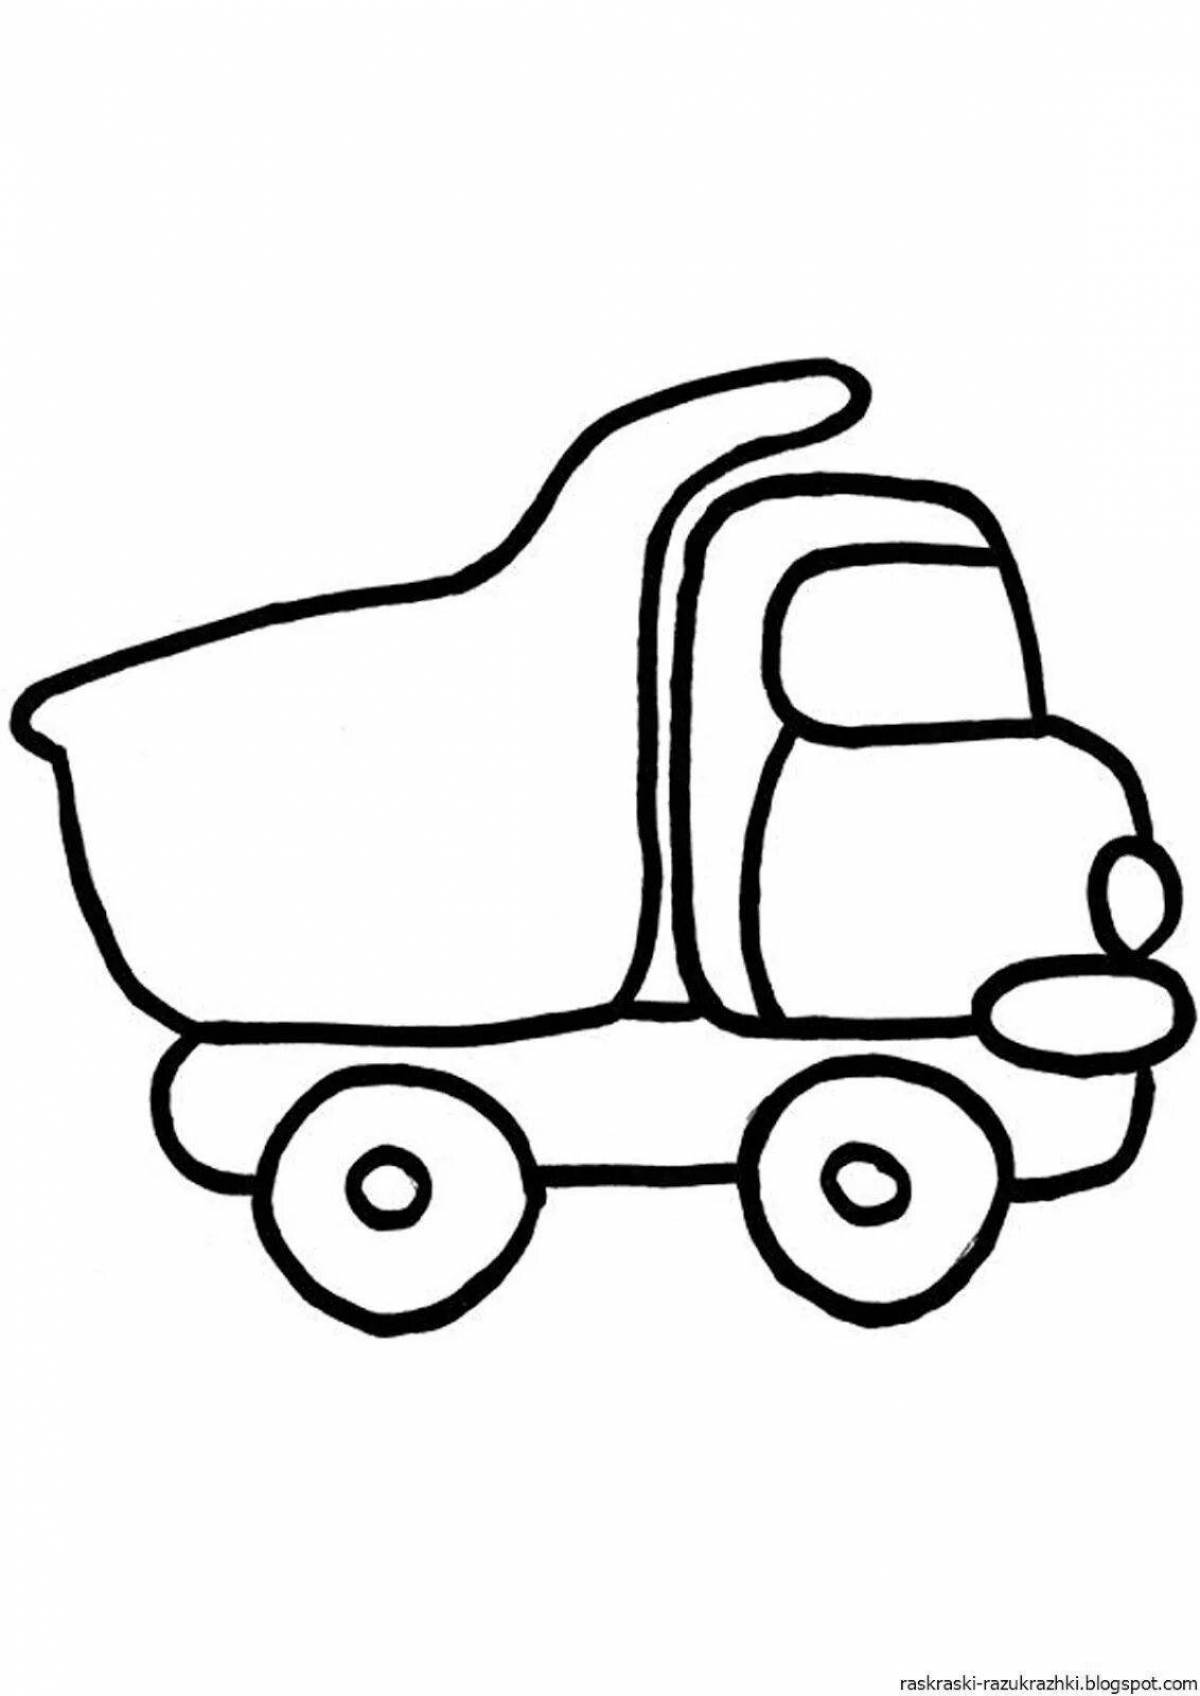 Coloring page adorable car toy